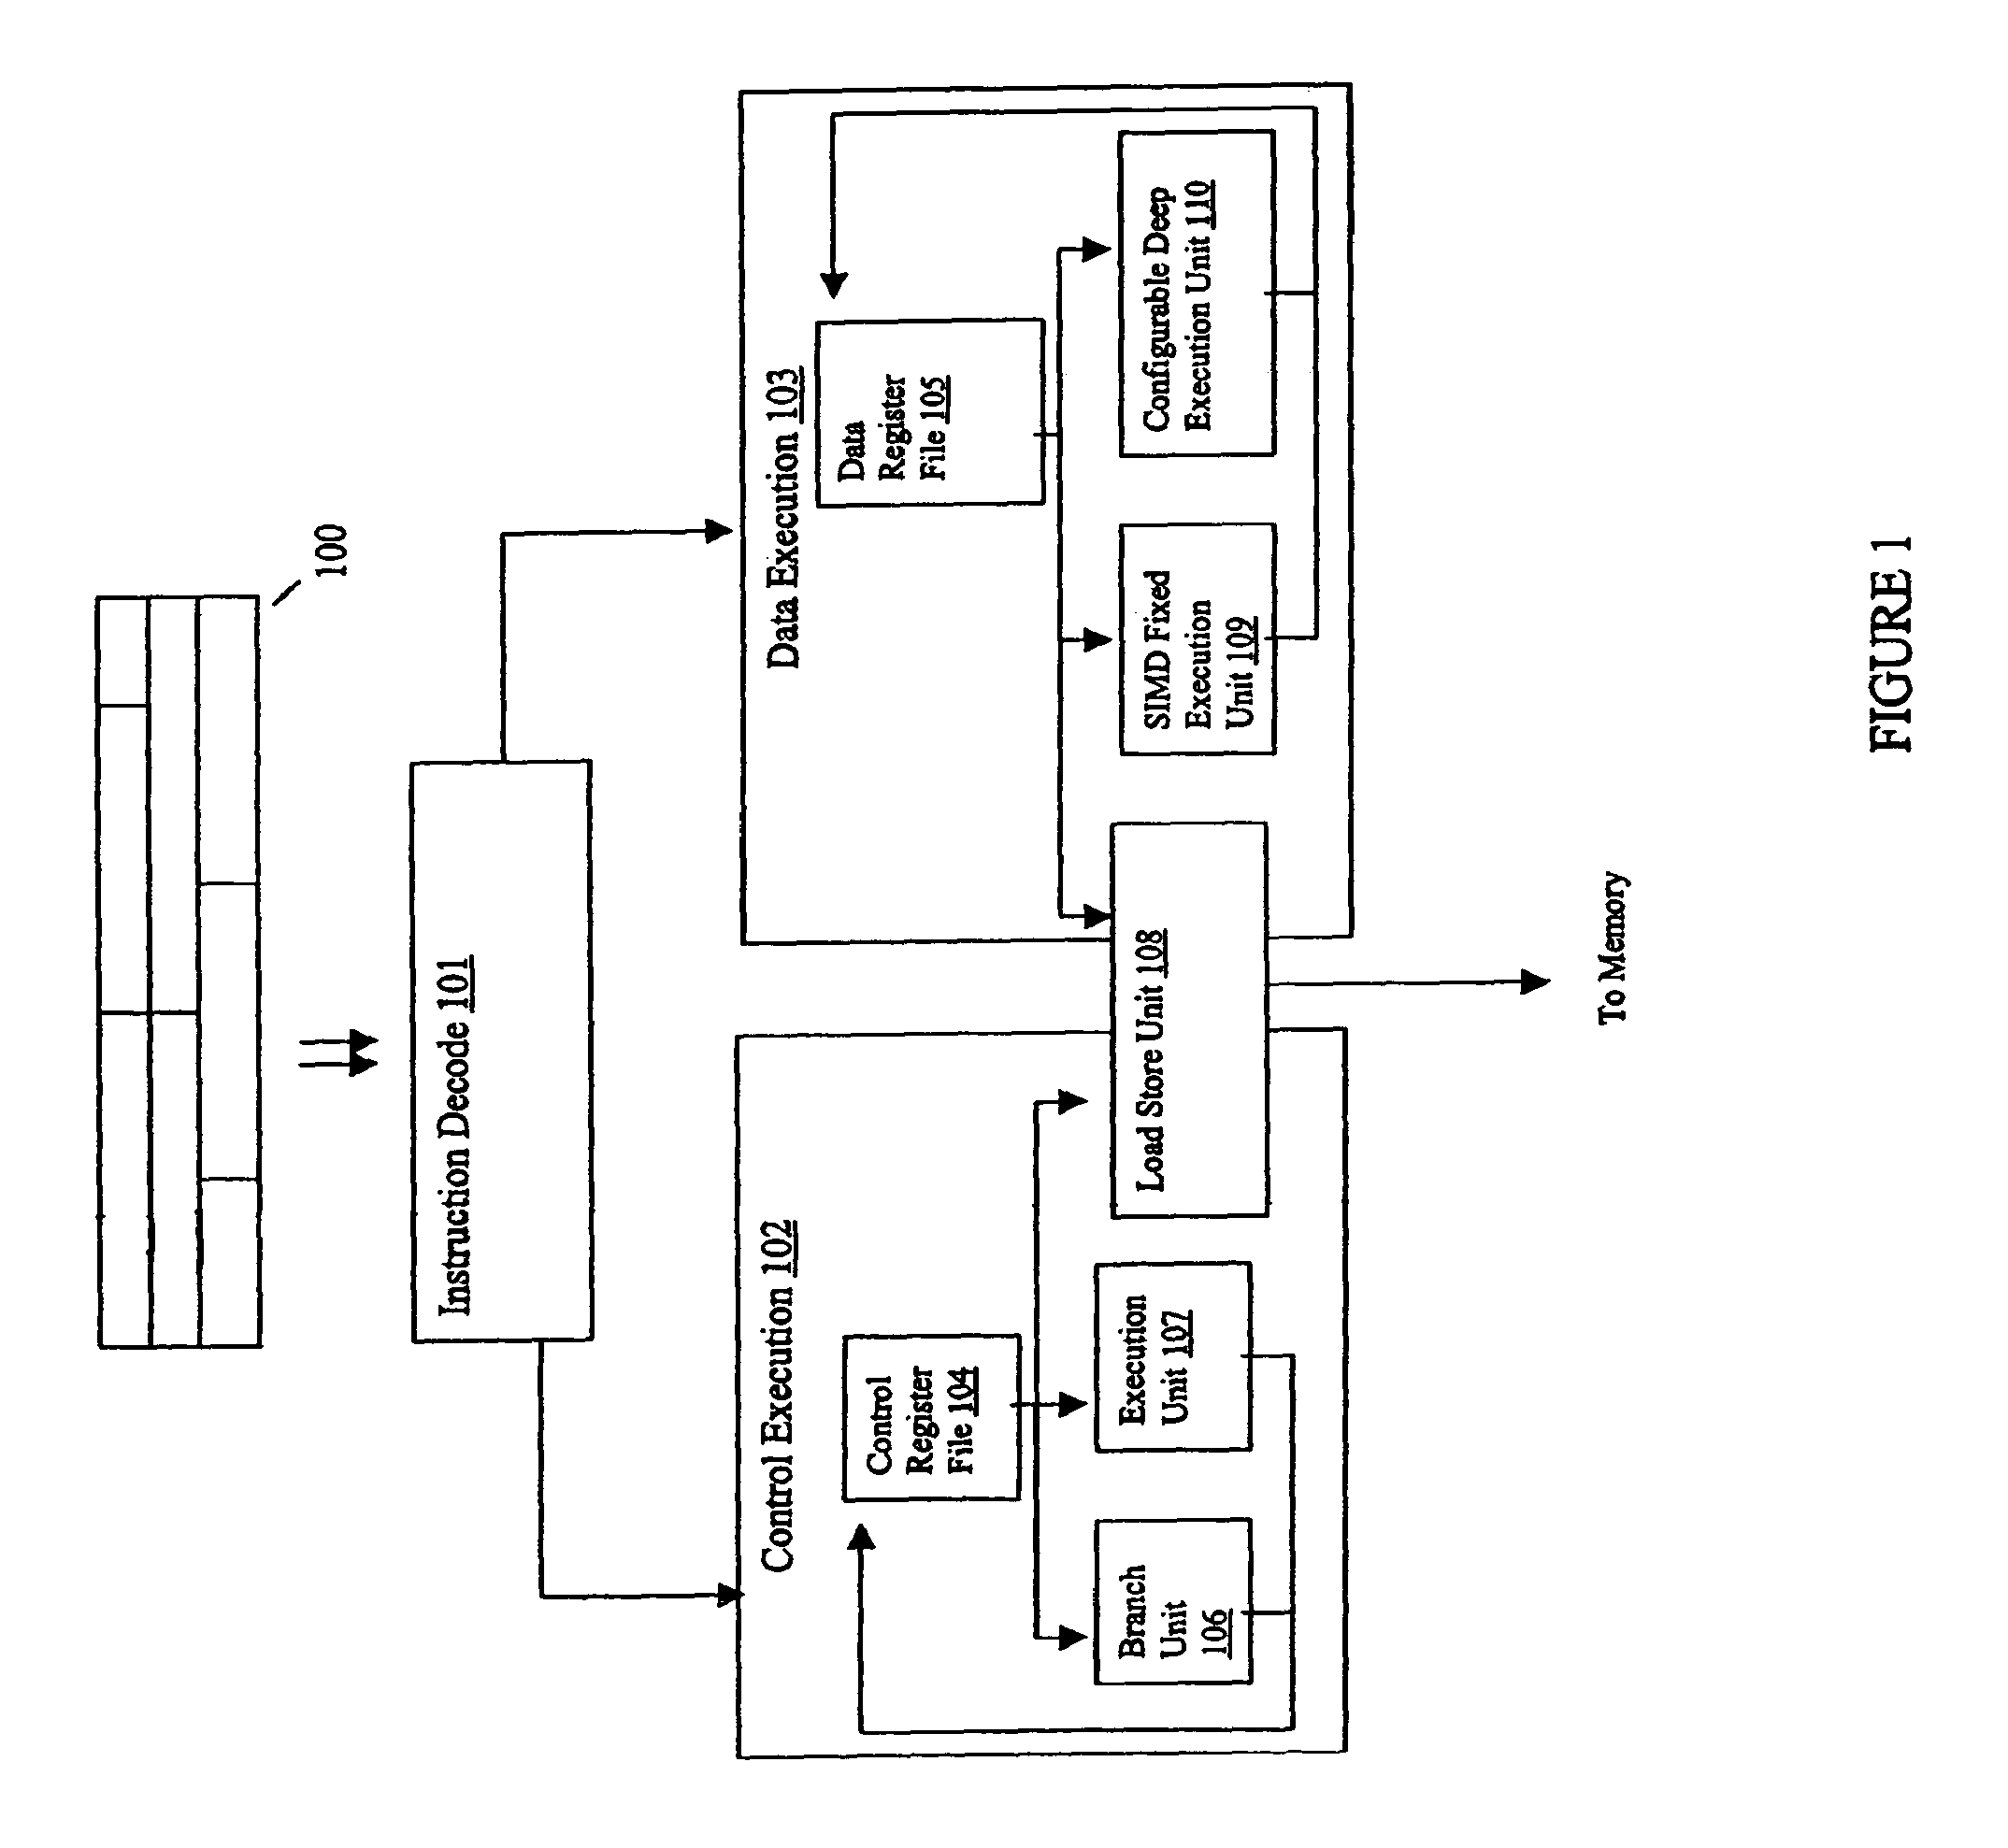 Apparatus and method for asymmetric dual path processing